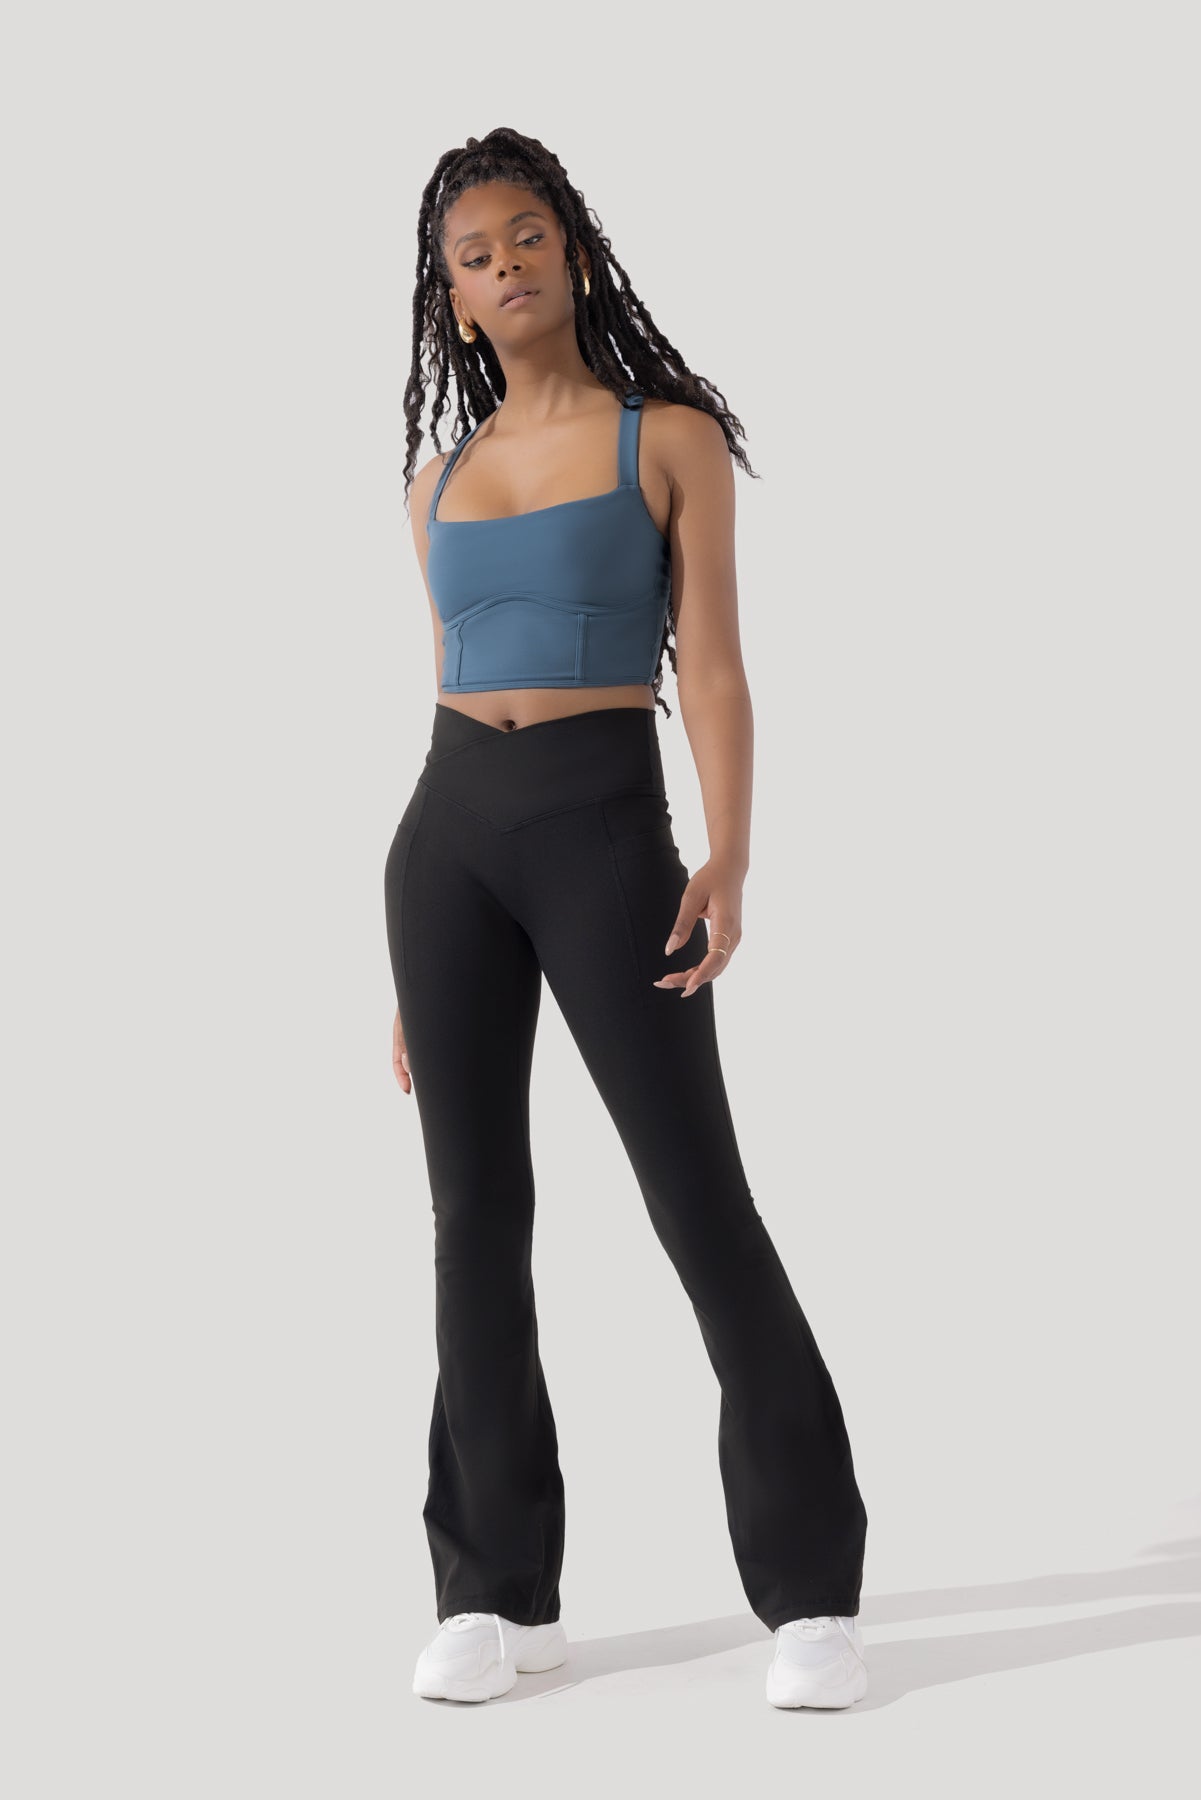 Best Deal for Ruffle Bell Bottoms,Soccer Compression Pants,Bubblelime